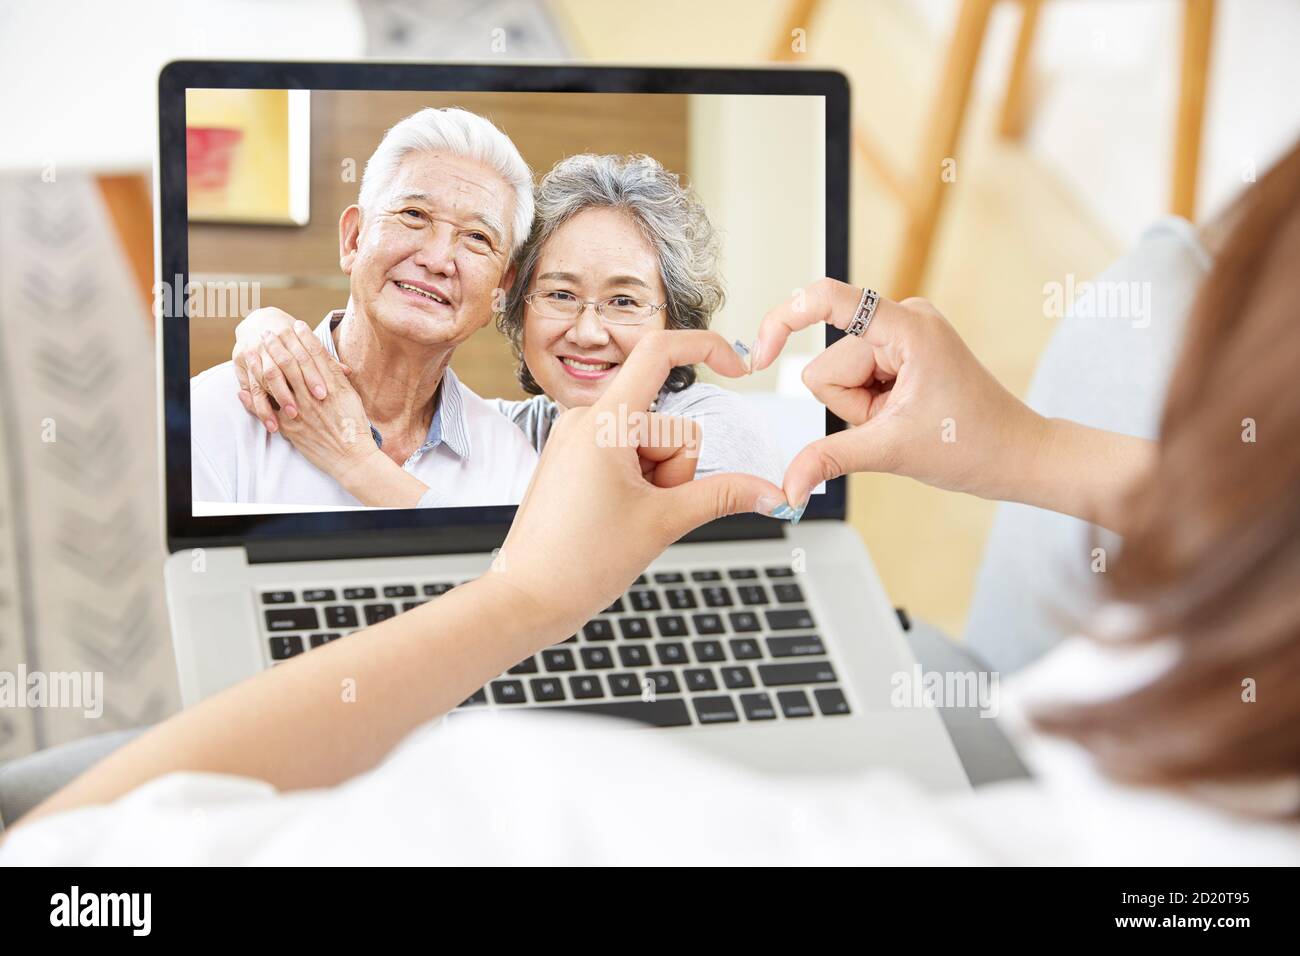 young asian adult daughter staying at home forming a heart shape with hands while talking to senior parents online via video chat using laptop compute Stock Photo